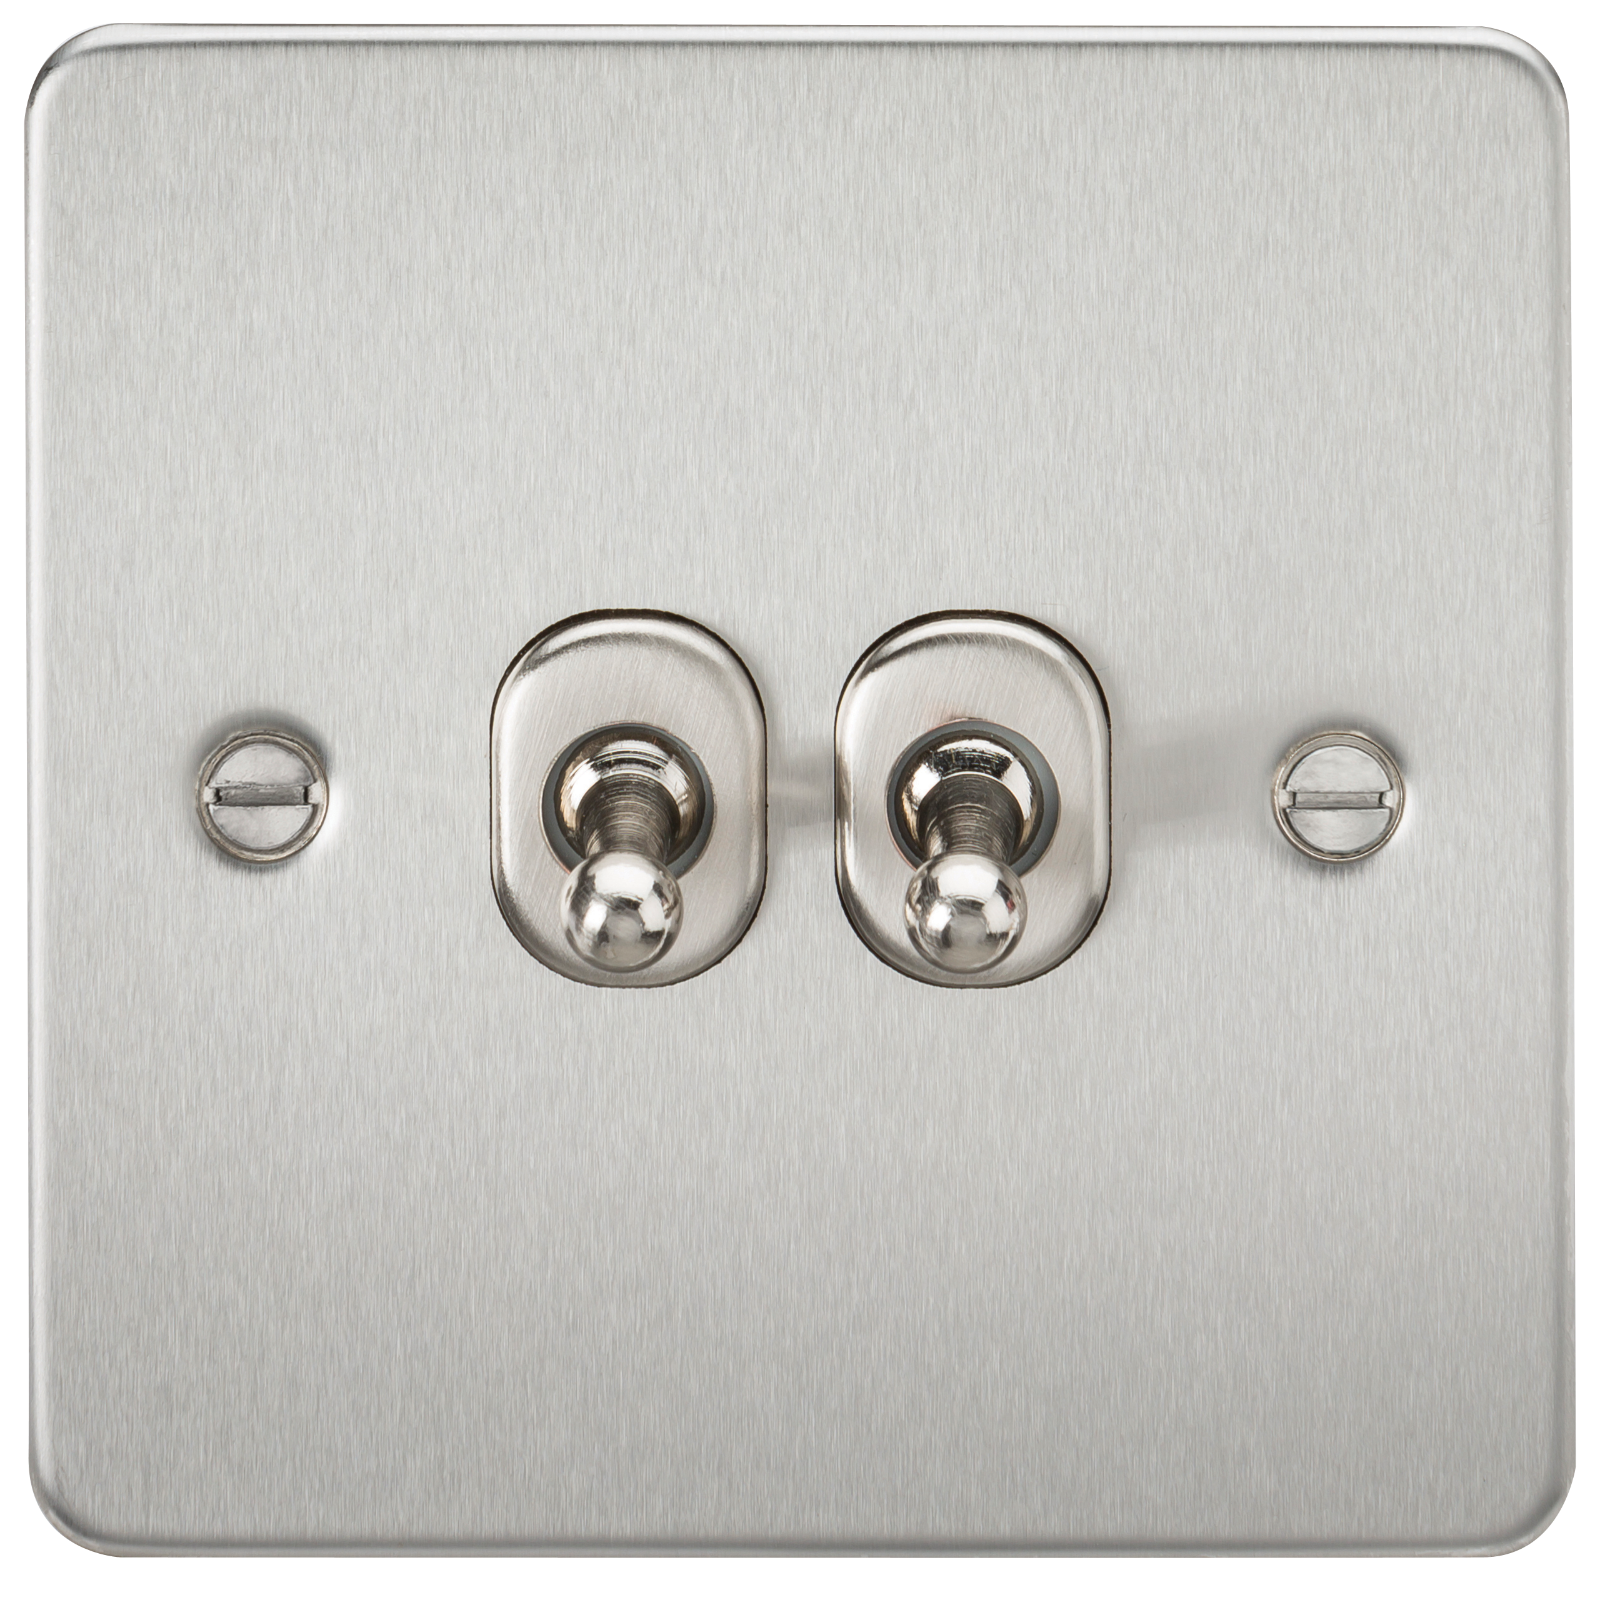 Flat Plate 10A 2G 2-way Toggle Switch - Brushed Chrome - FP2TOGBC 